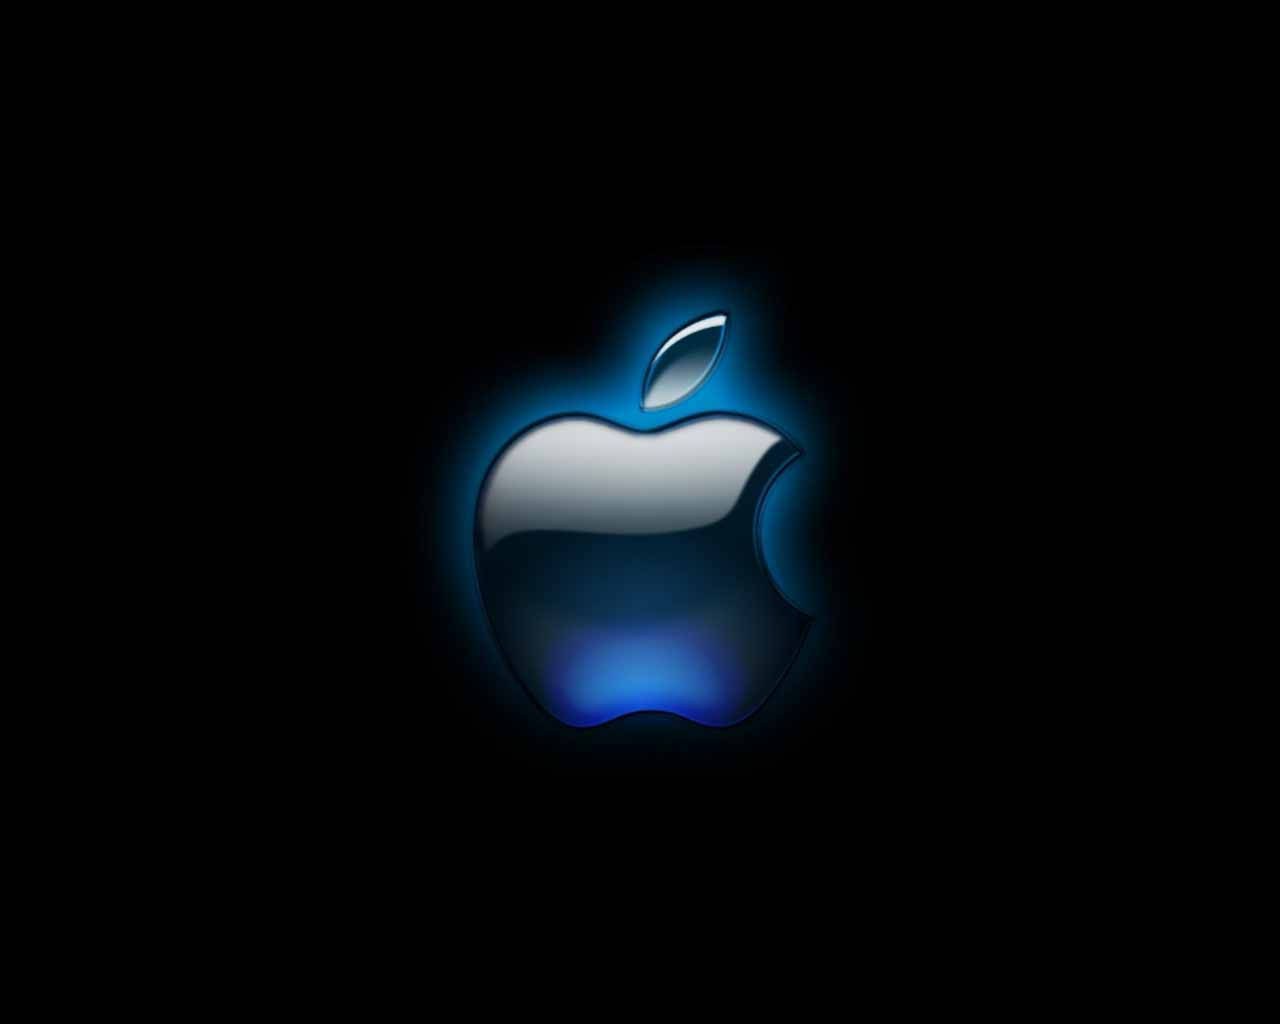 The Iconic 3d Apple Logo In A Glowing Light. Wallpaper